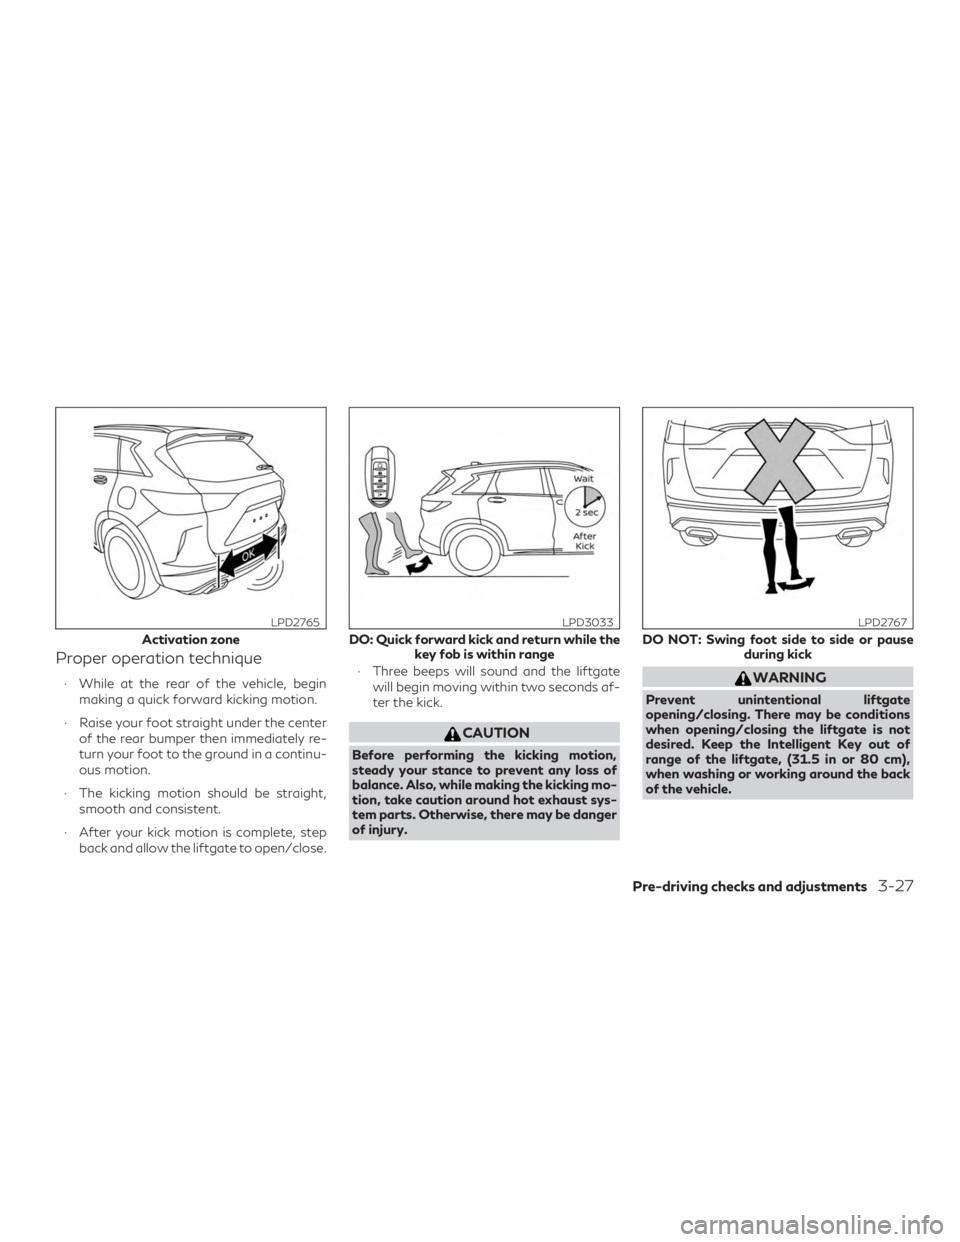 INFINITI QX50 2020  Owners Manual Proper operation technique
∙ While at the rear of the vehicle, beginmaking a quick forward kicking motion.
∙ Raise your foot straight under the center of the rear bumper then immediately re-
turn 